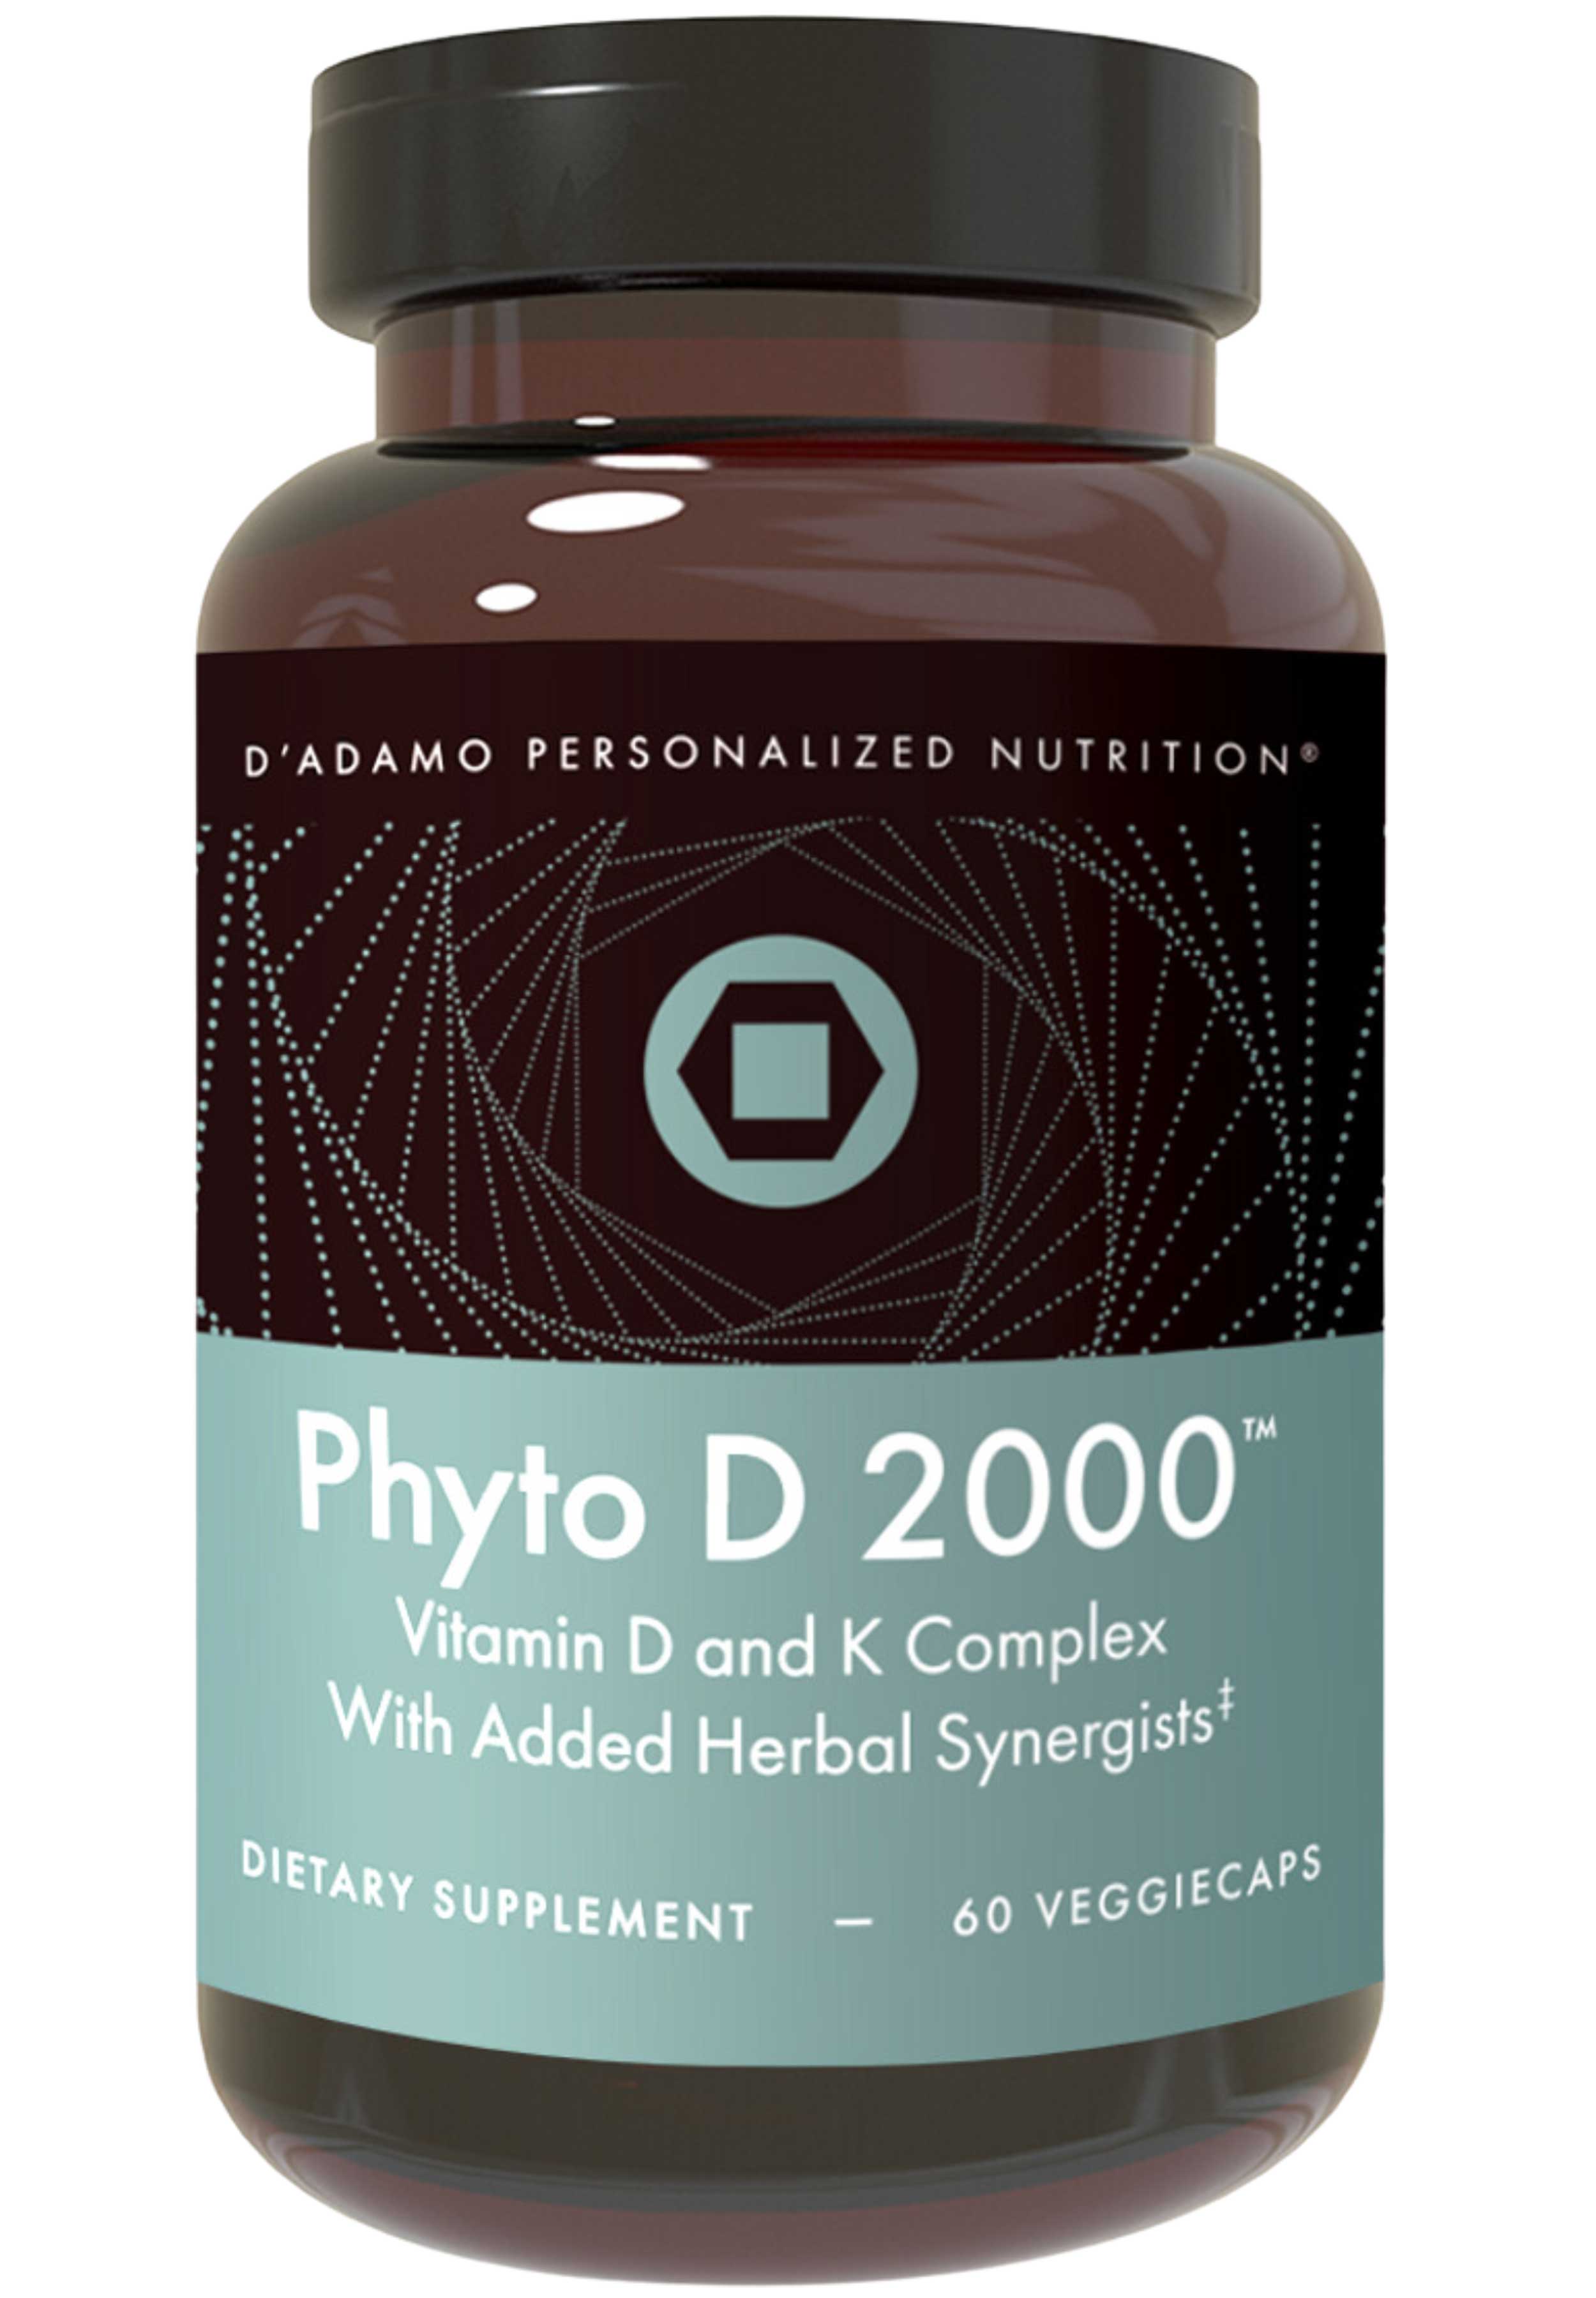 D'Adamo Personalized Nutrition Phyto D 2000